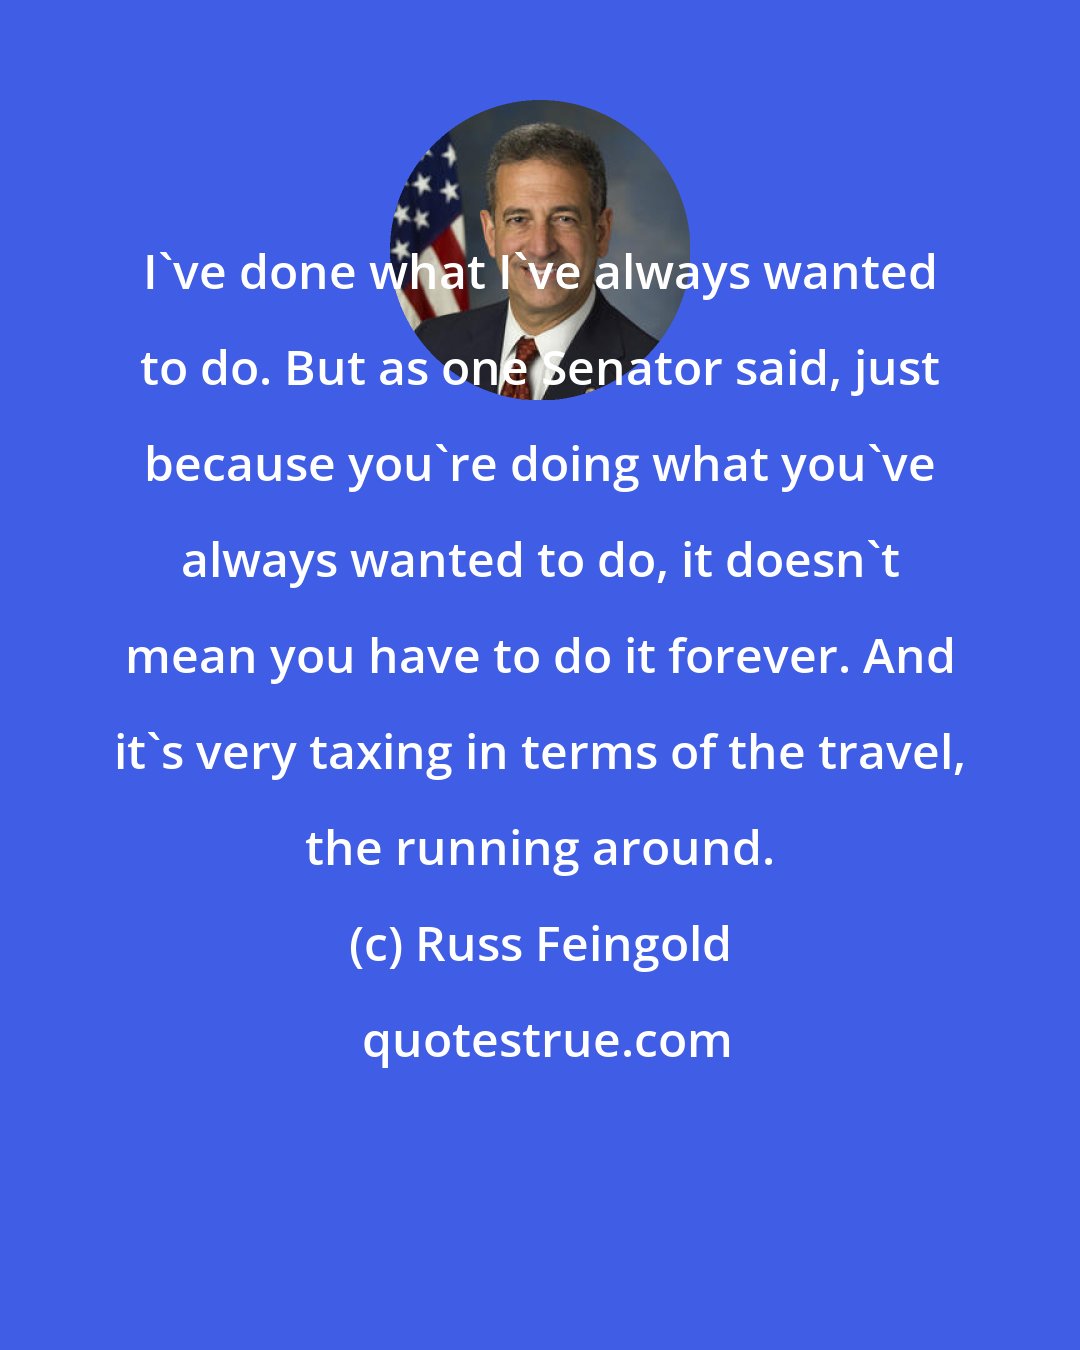 Russ Feingold: I've done what I've always wanted to do. But as one Senator said, just because you're doing what you've always wanted to do, it doesn't mean you have to do it forever. And it's very taxing in terms of the travel, the running around.